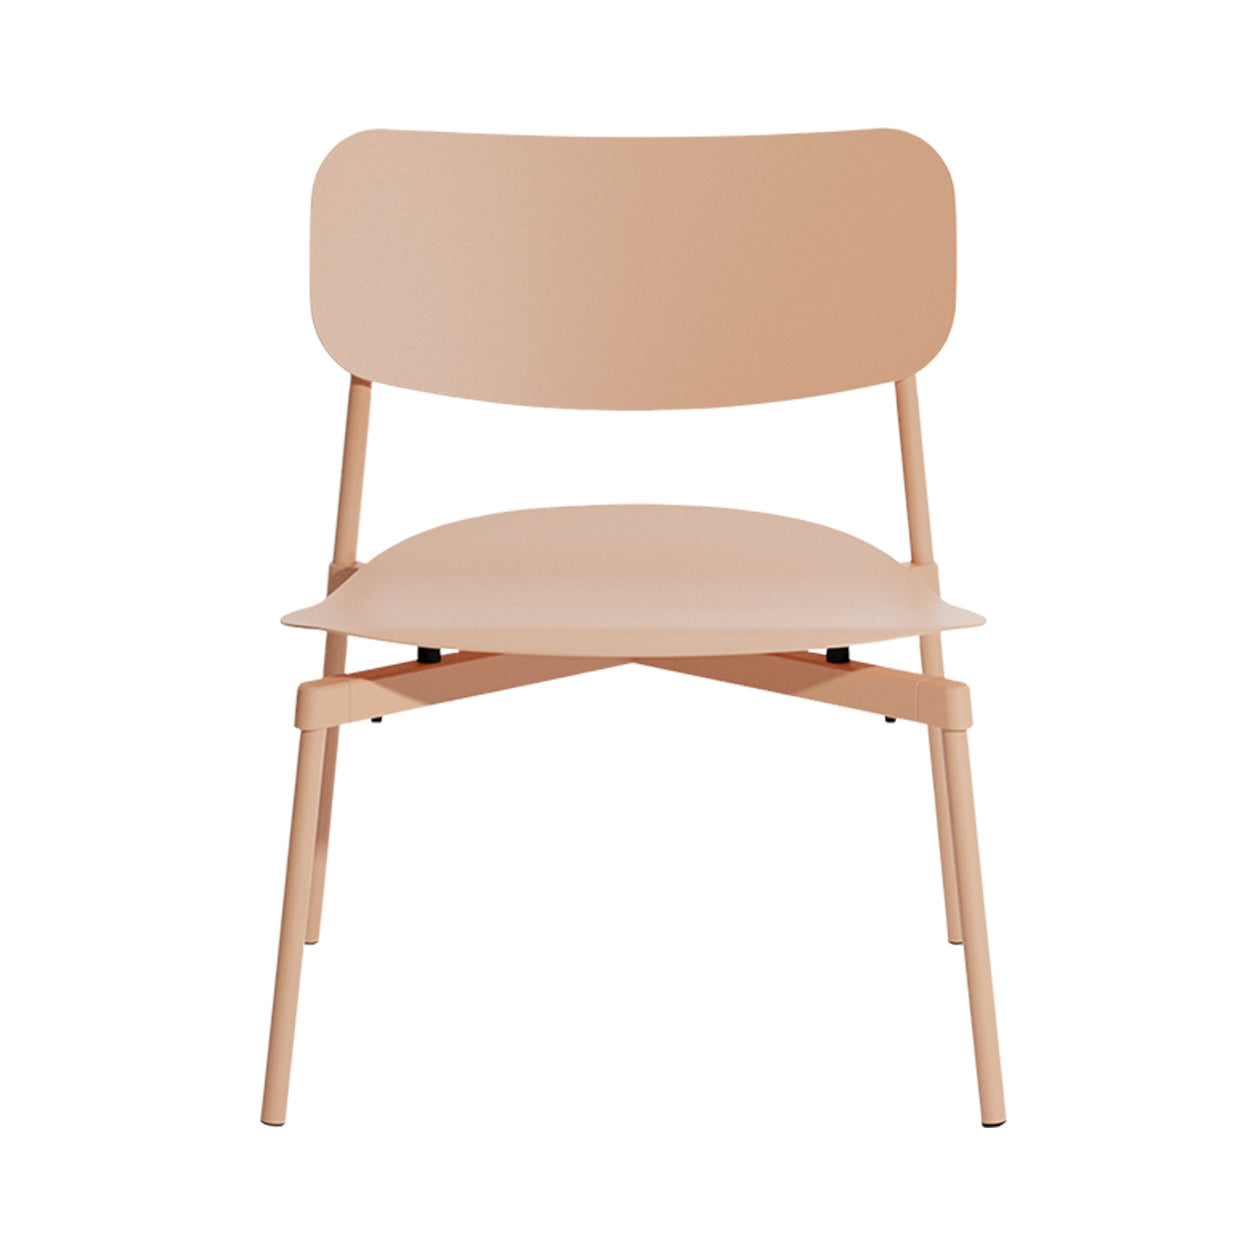 Fromme Stacking Lounge Chair: Blush